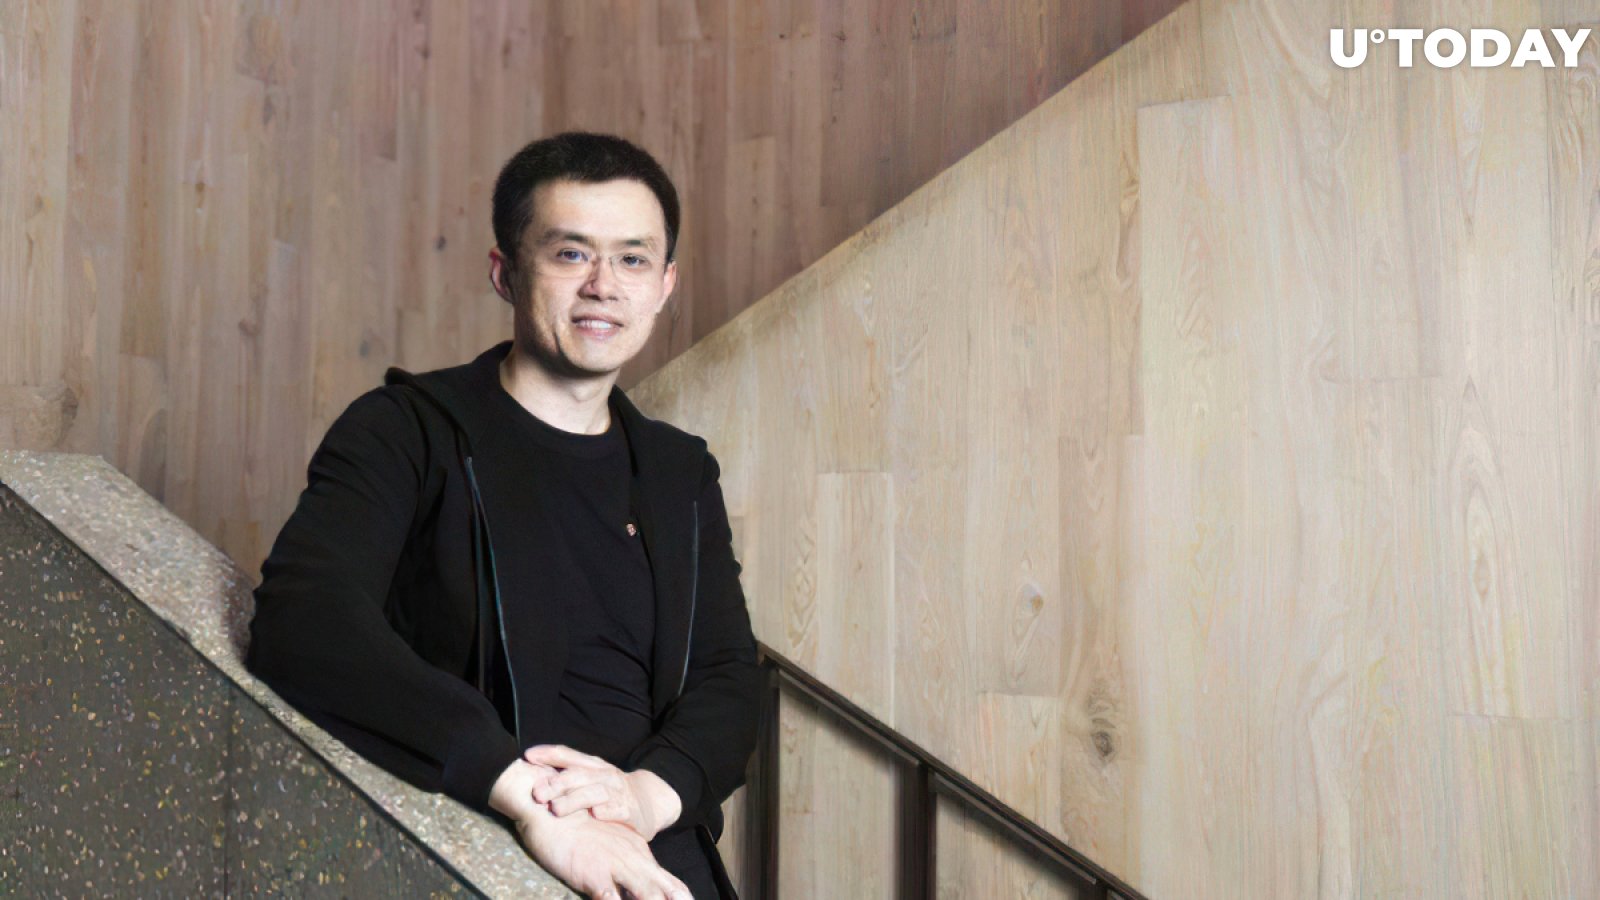 Binance's CEO Unveils His Bitcoin (BTC) Story: "Never Sold, Doing Fine." When Did He Buy?